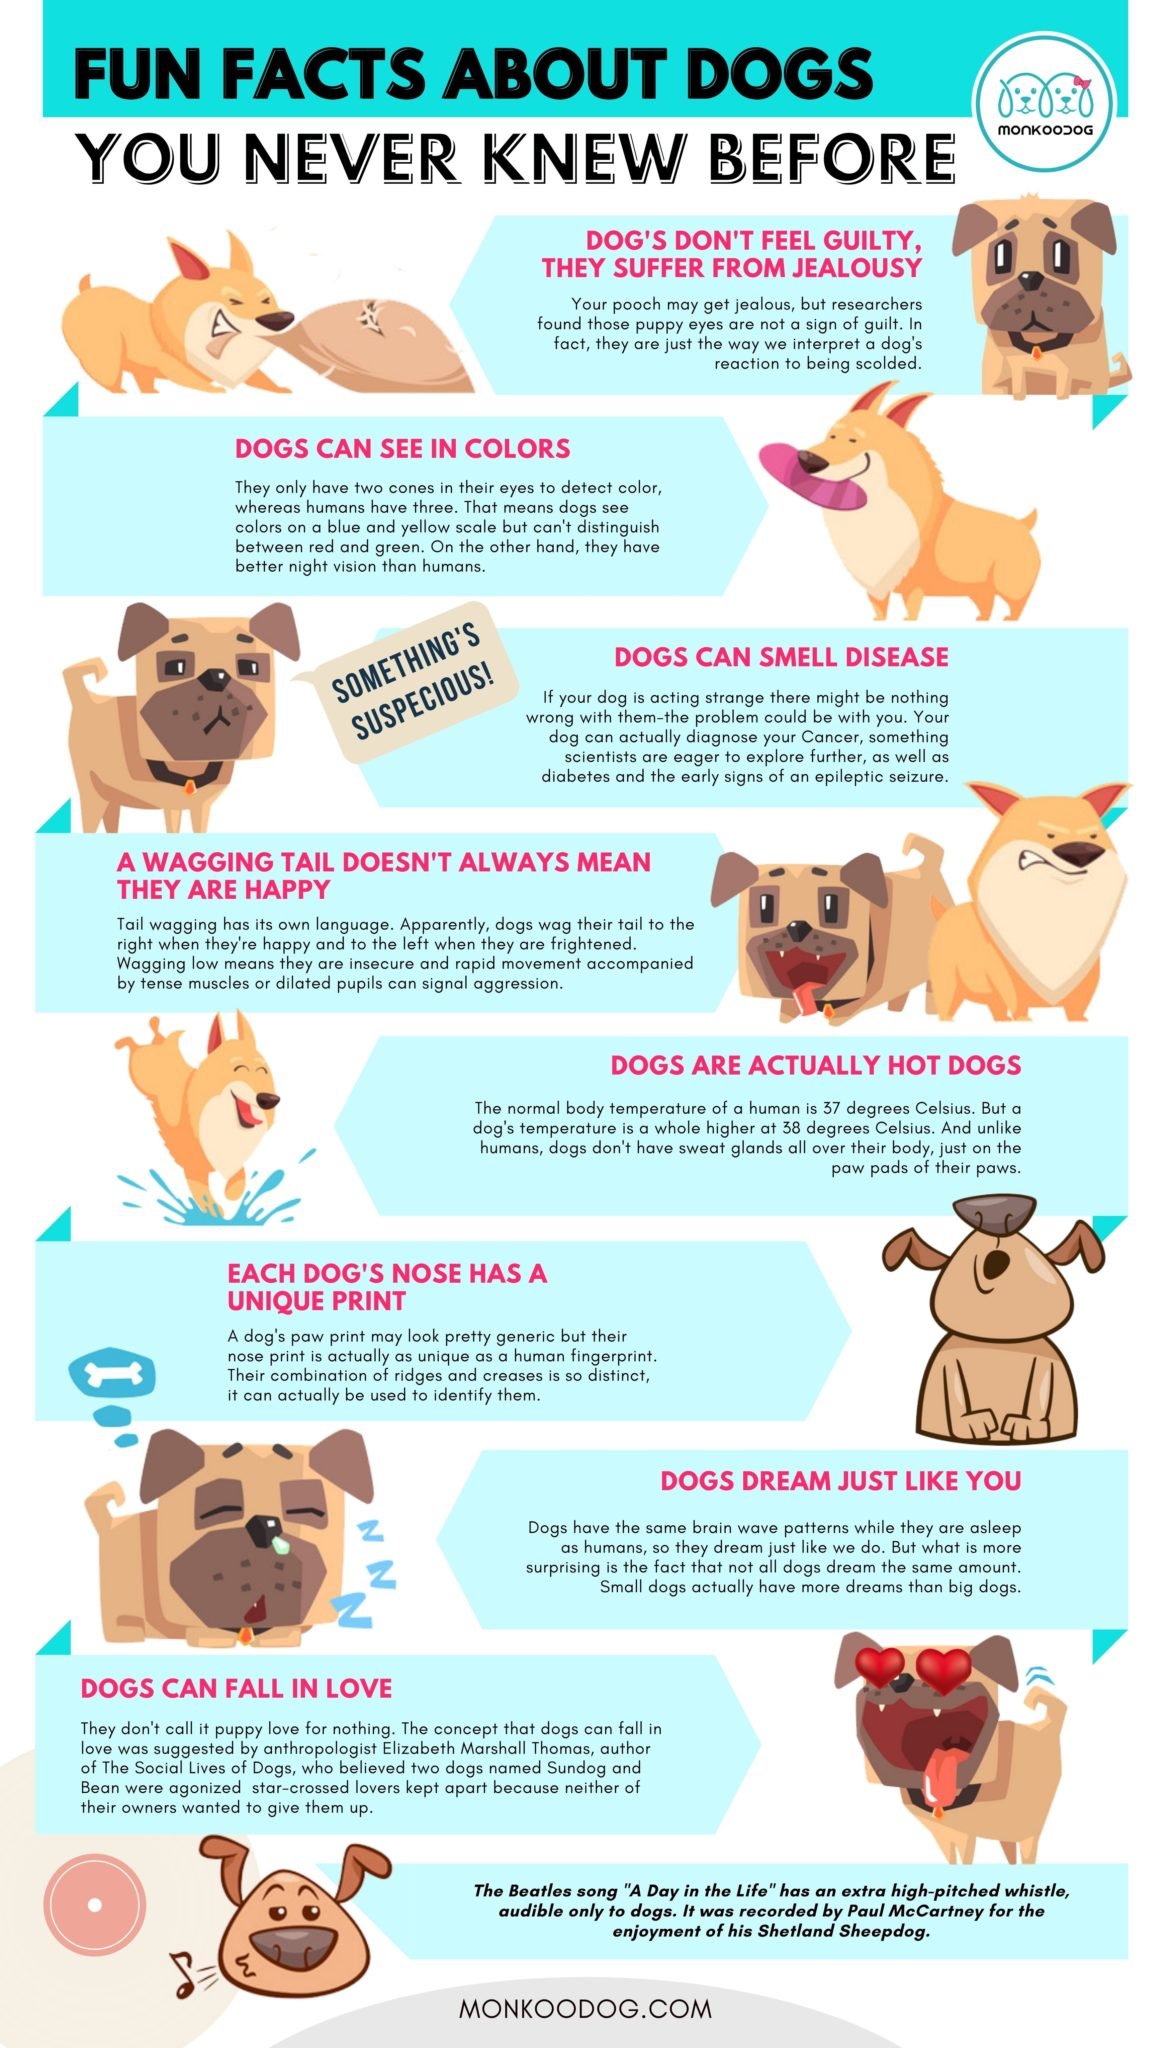 amazing-fun-facts-about-dogs-you-probably-didn-t-know-monkoodog